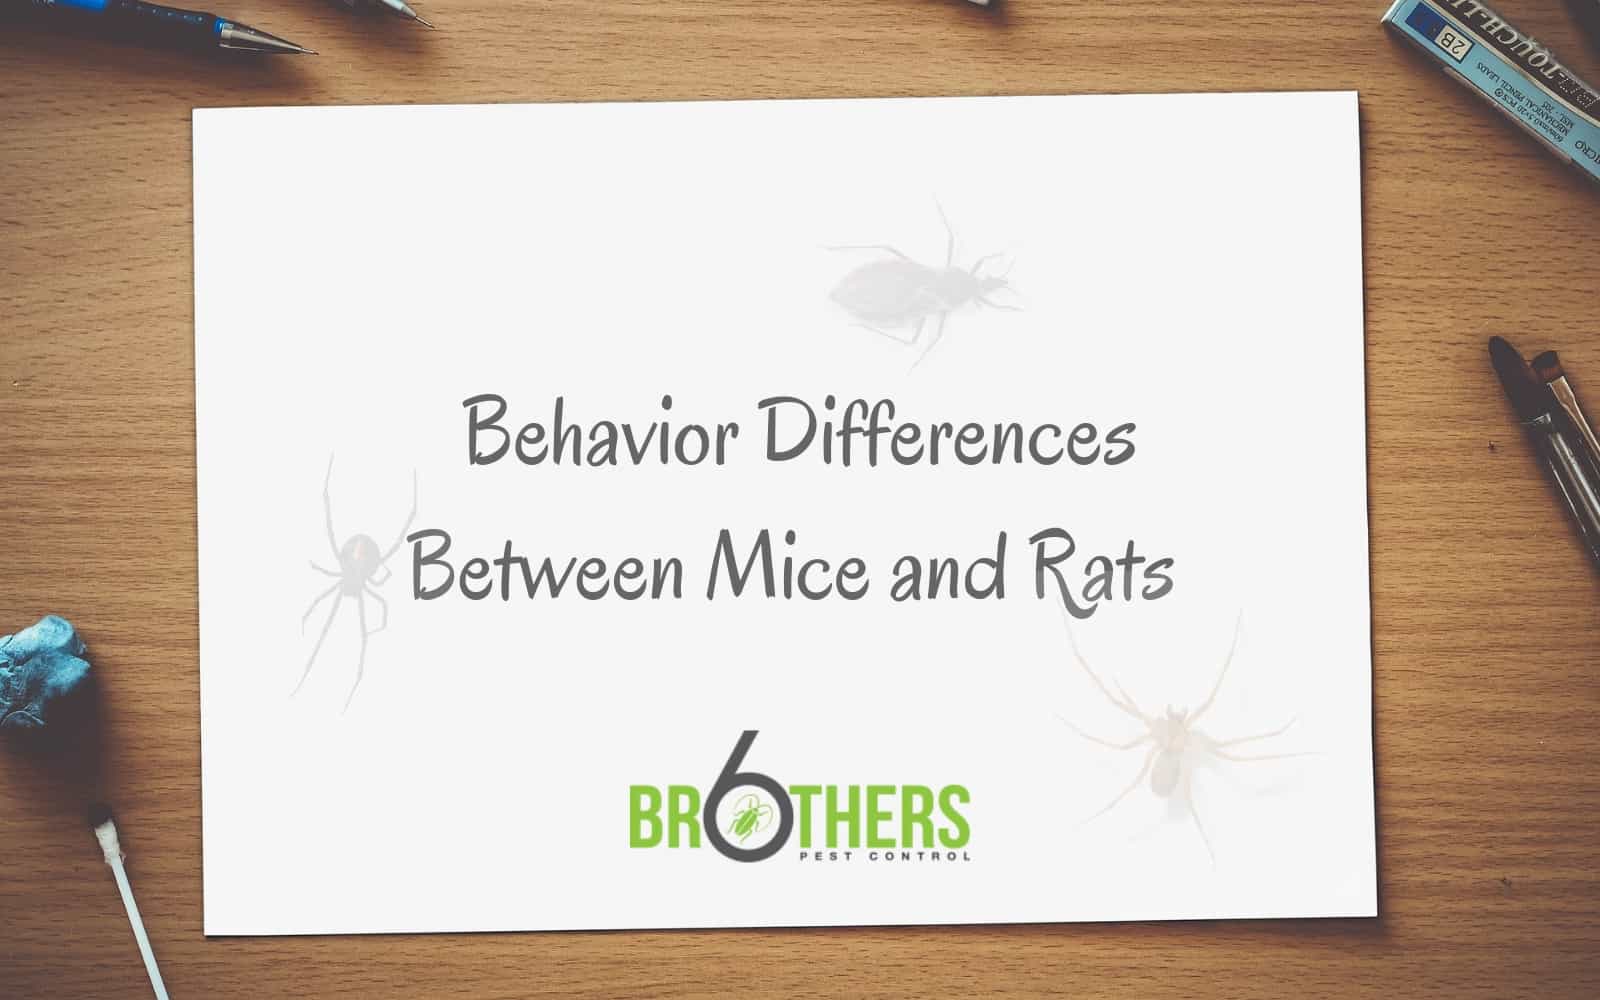 Behavior Differences Between Mice and Rats